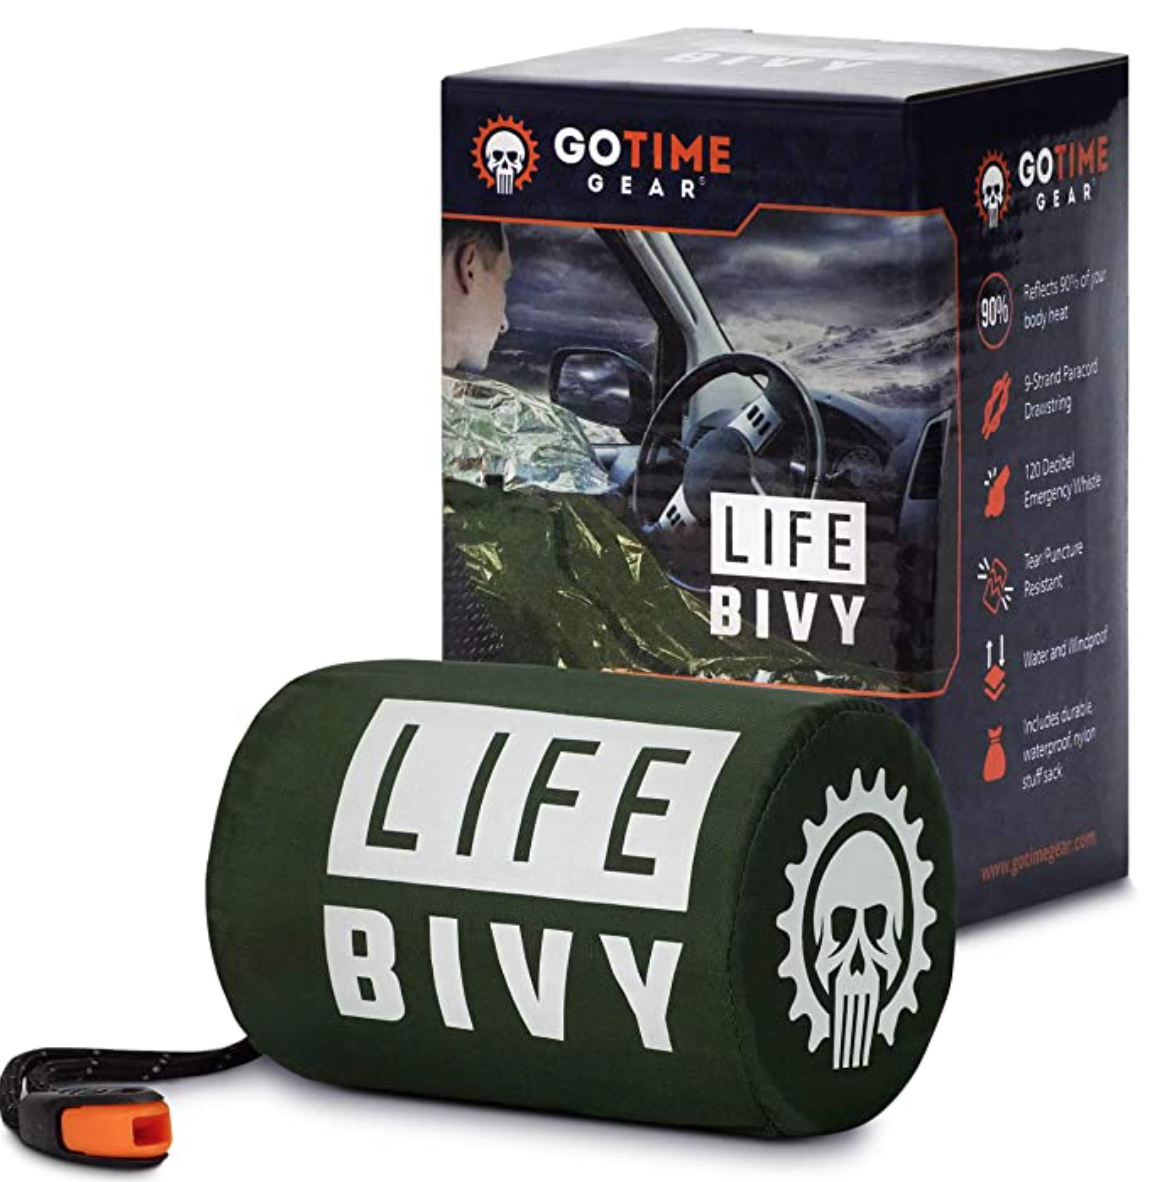 Go Time Gear Life Bivy Emergency Sleeping Bag Thermal Bivvy - Use as Emergency Bivy Sack, Survival Sleeping Bag, Mylar Emergency Blanket - Includes Stuff Sack with Survival Whistle + Paracord String